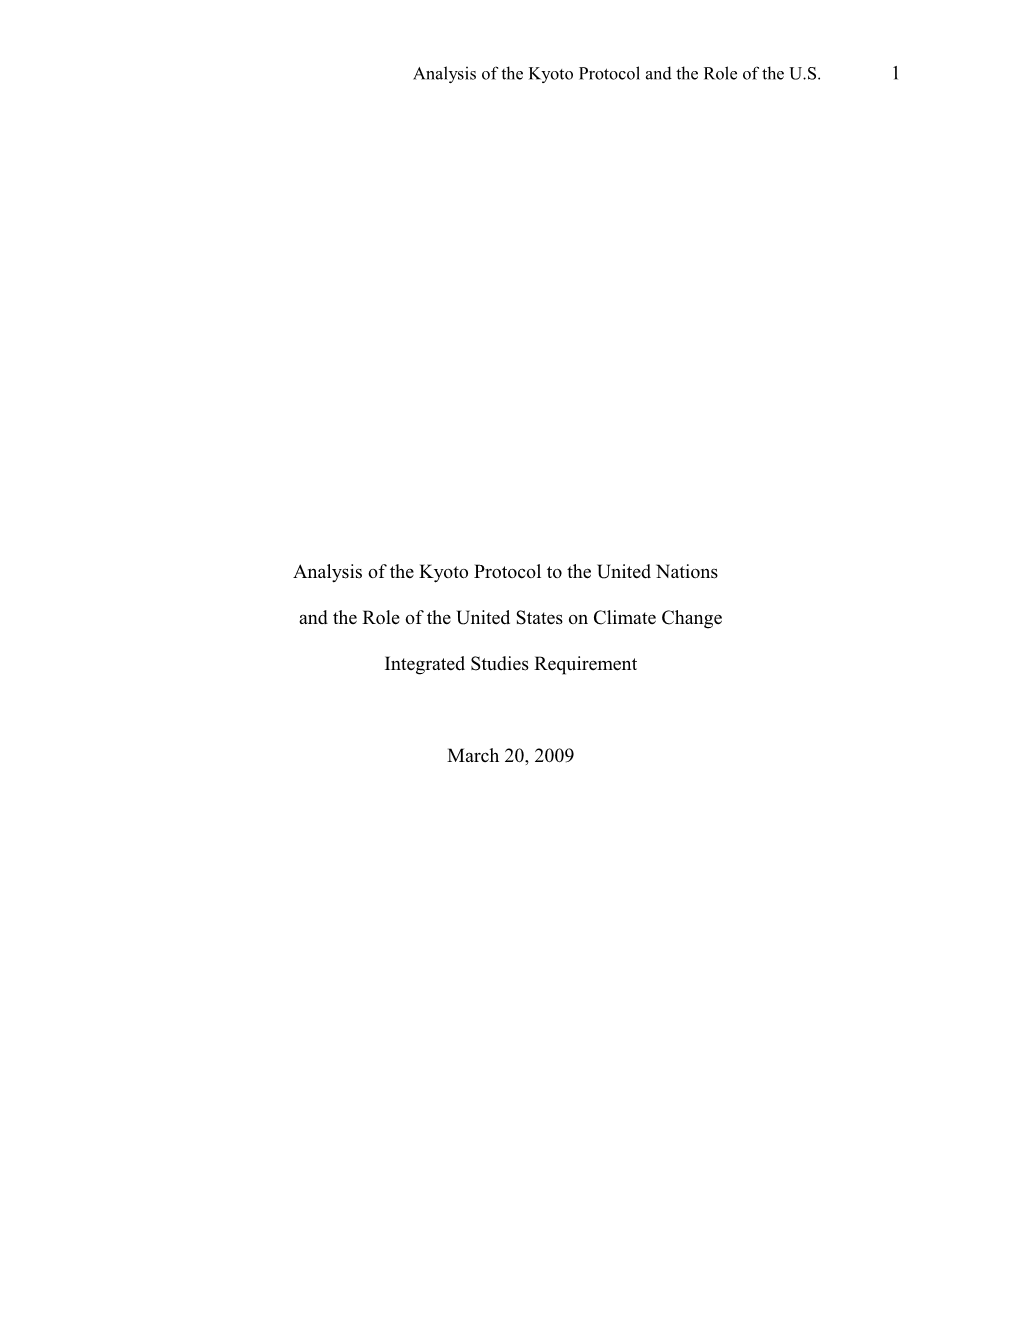 Analysis of the Kyoto Protocol to the United Nations